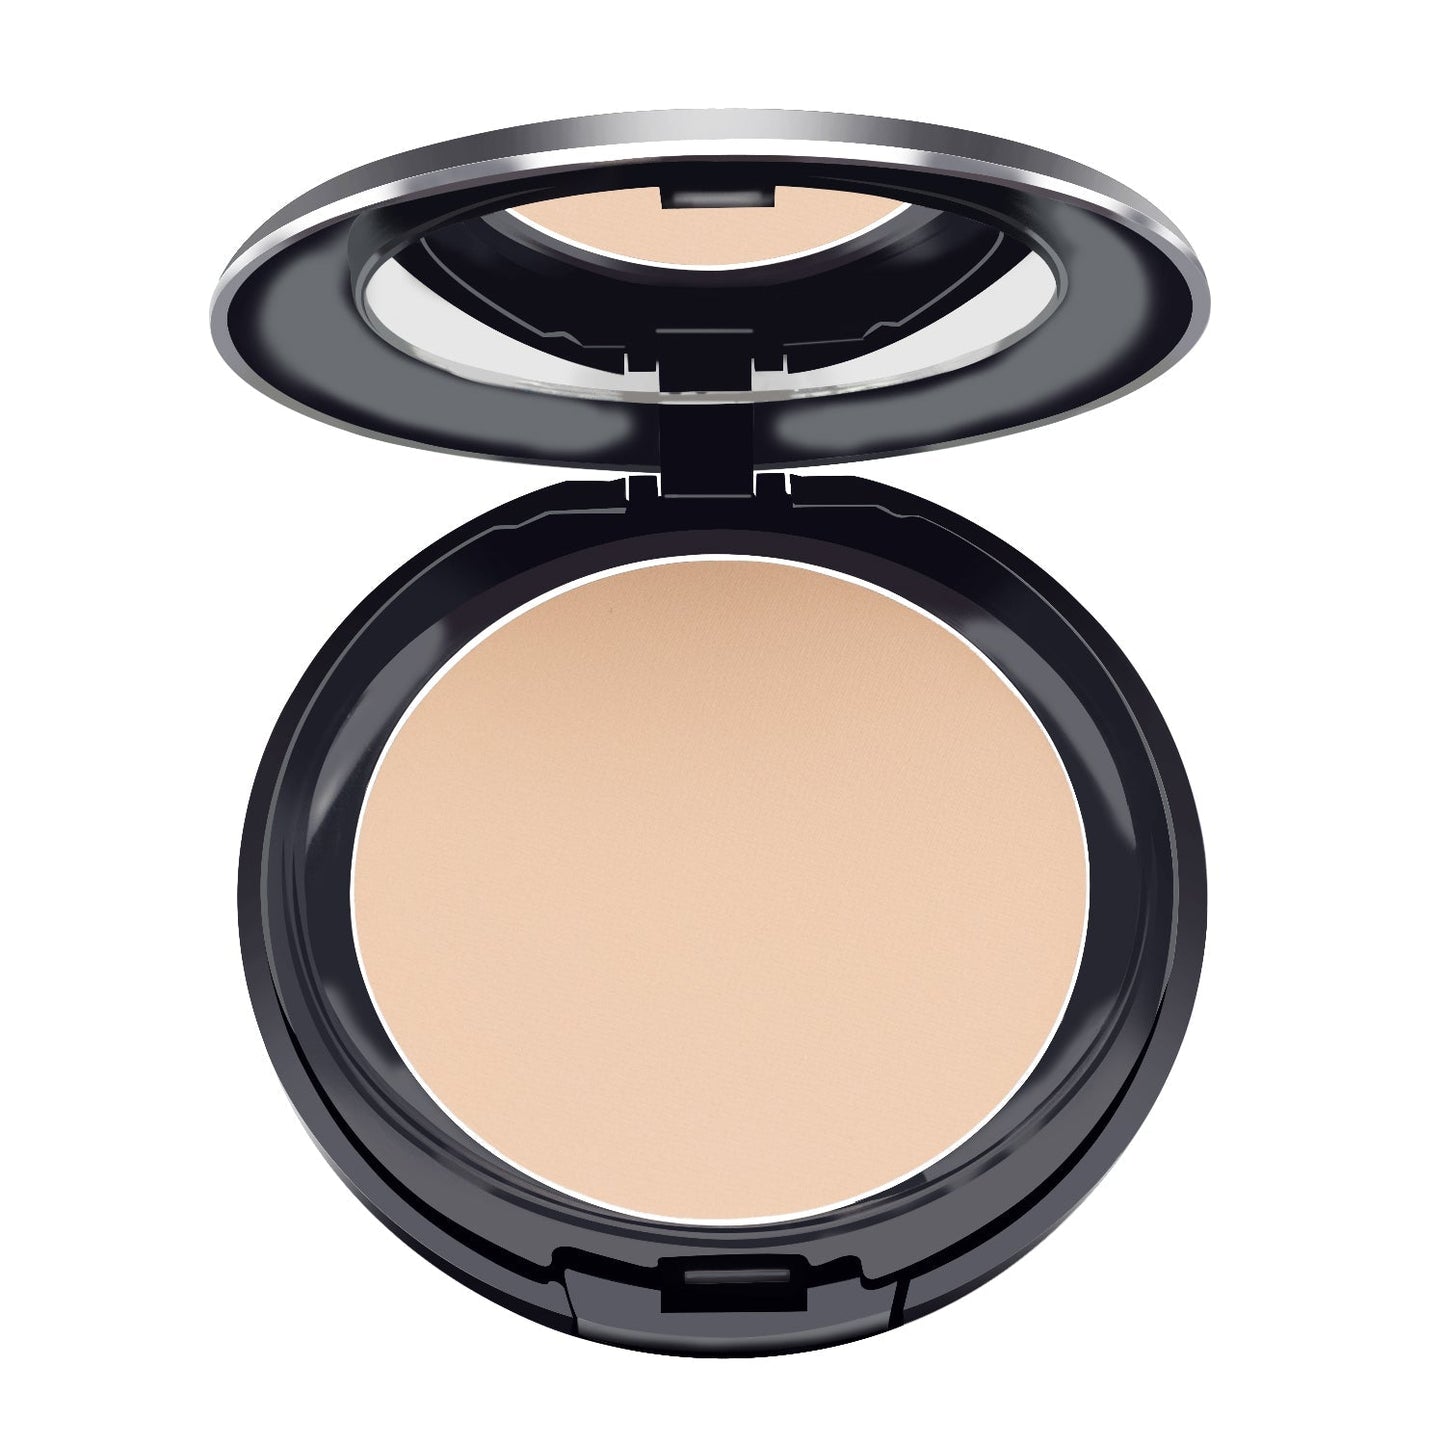 Glamgals Hollywood-U.S.A 3 In 1 Three Way Cake Compact Makeup+ Foundation + Concealer Spf 15, (Pink) - BUDNE